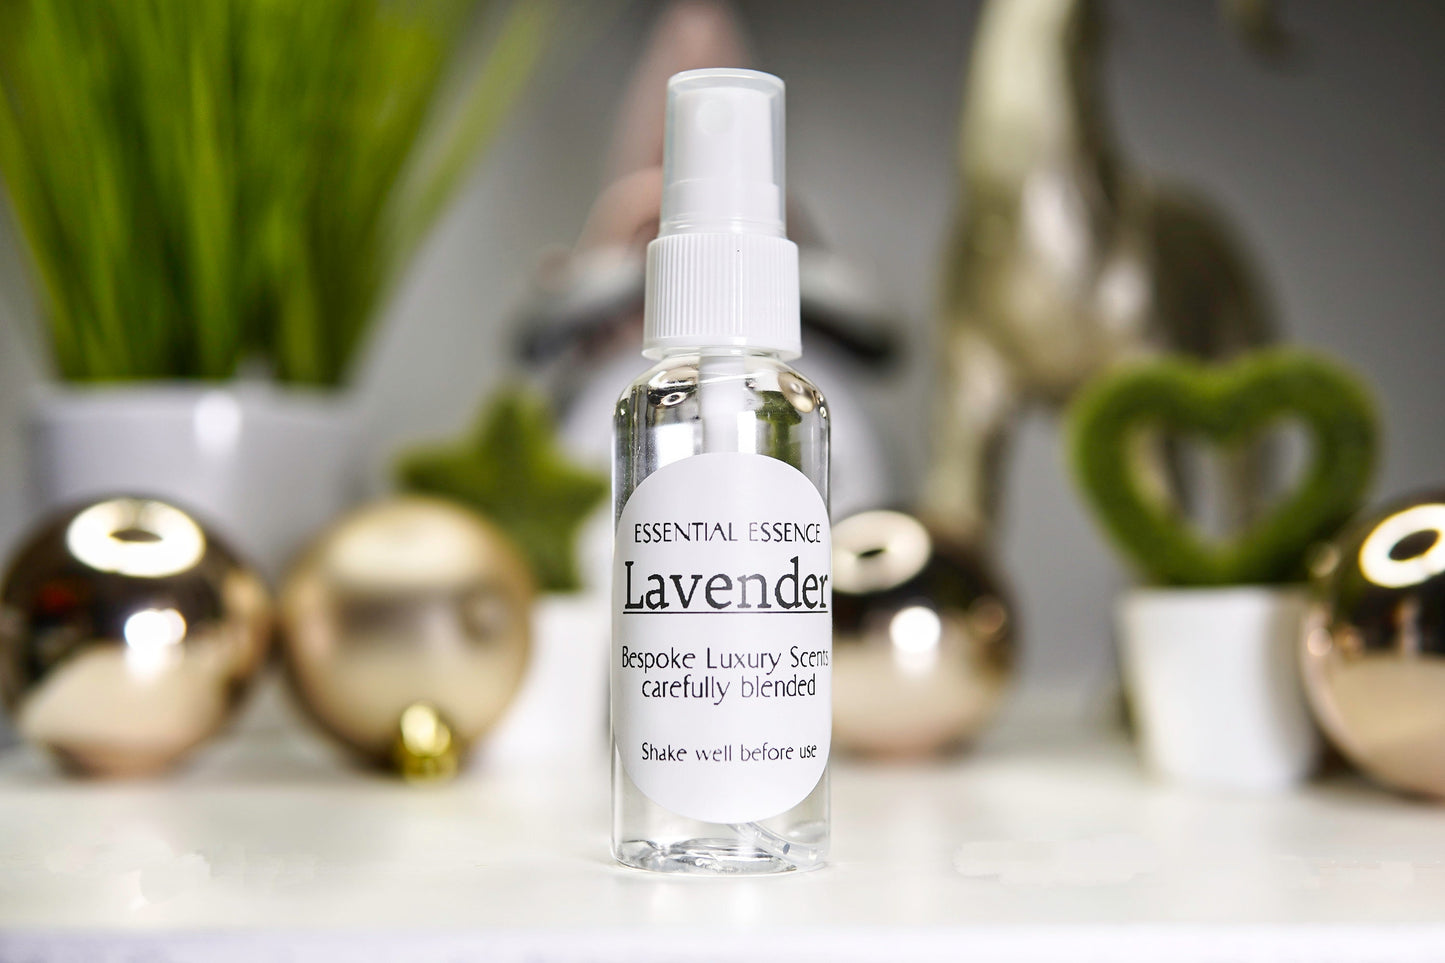 Lavender Pillow Mist & Linen Spray 50ml 5ml Room Spray - Therapeutic grade Essential Oil used - aromatherapy - anti anxiety